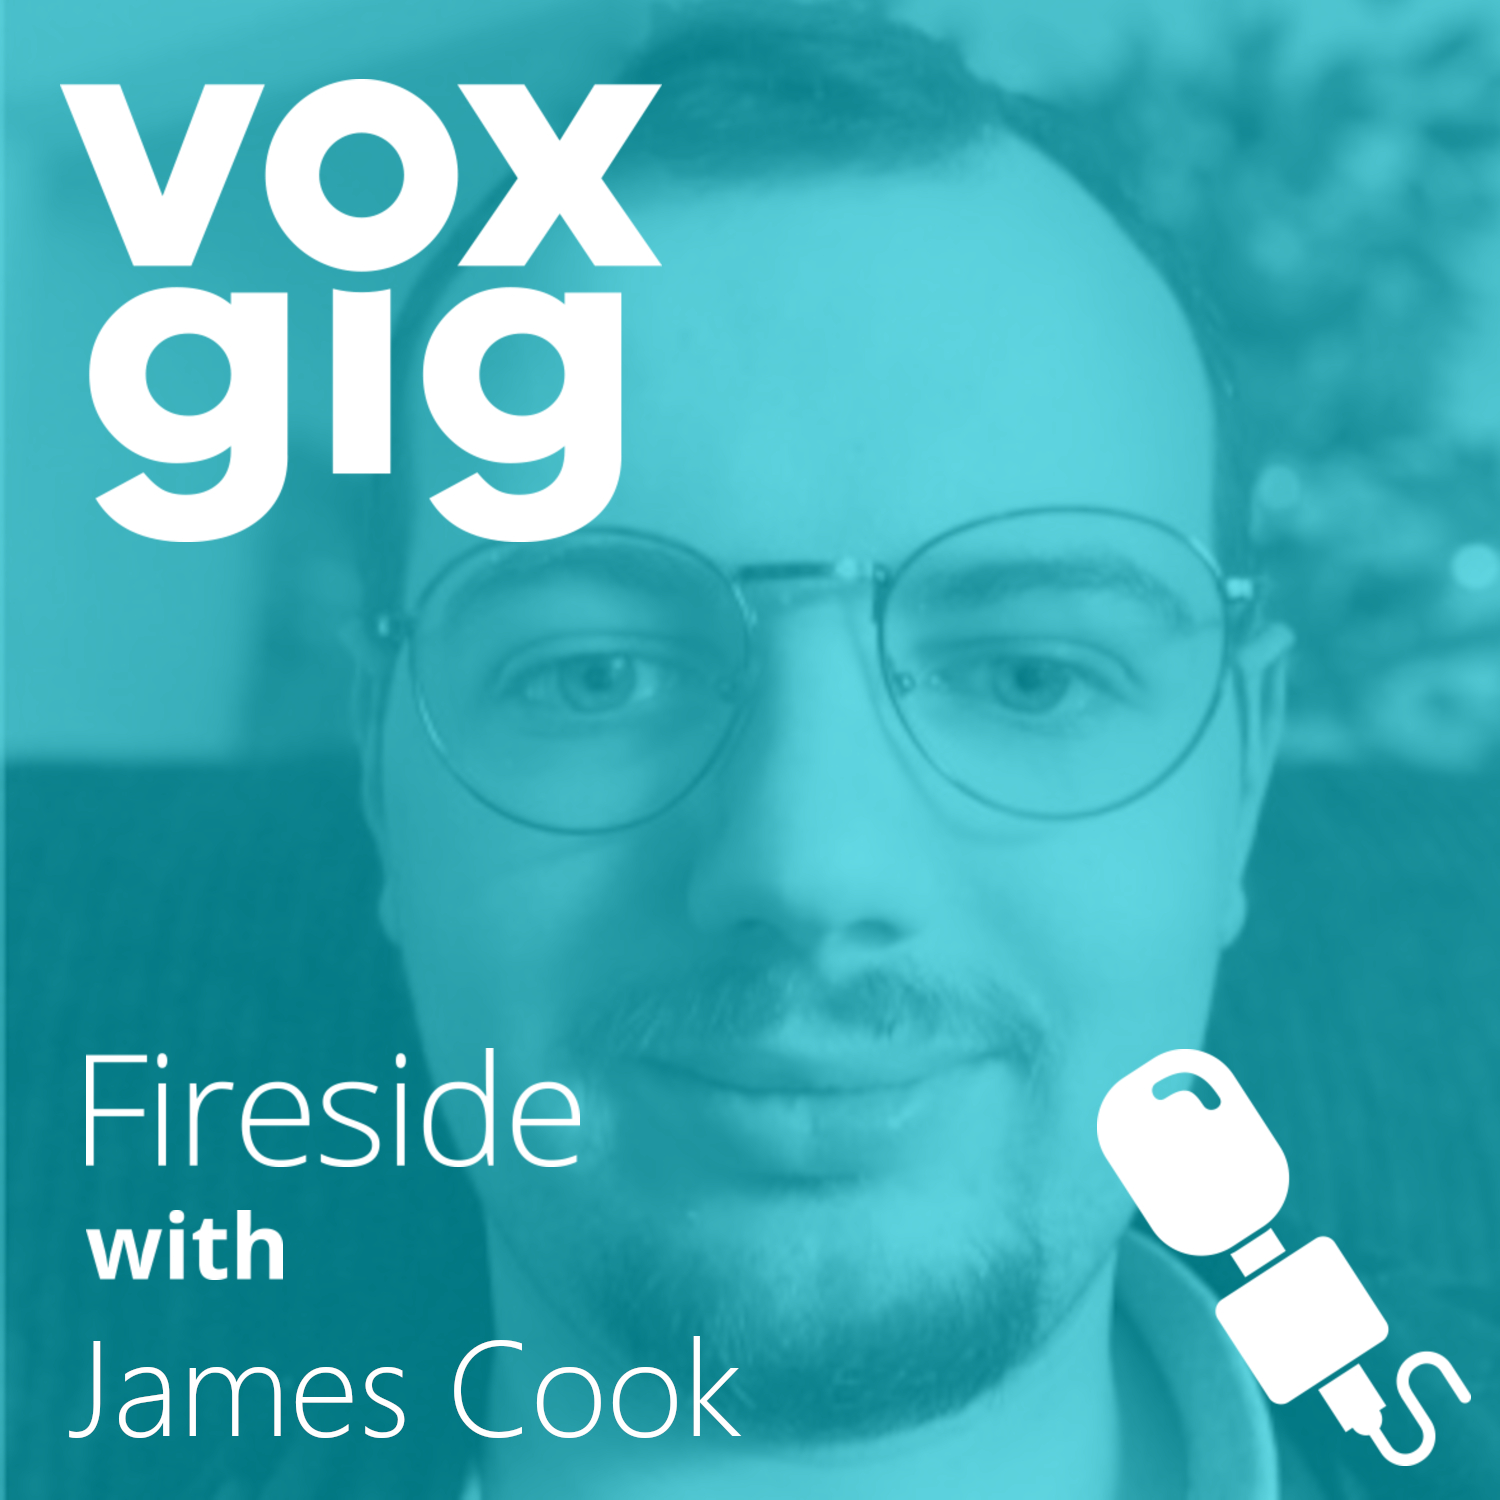 Episode 149 James Cook, Microsoft MVP and Director of DevOps at Coyote Software